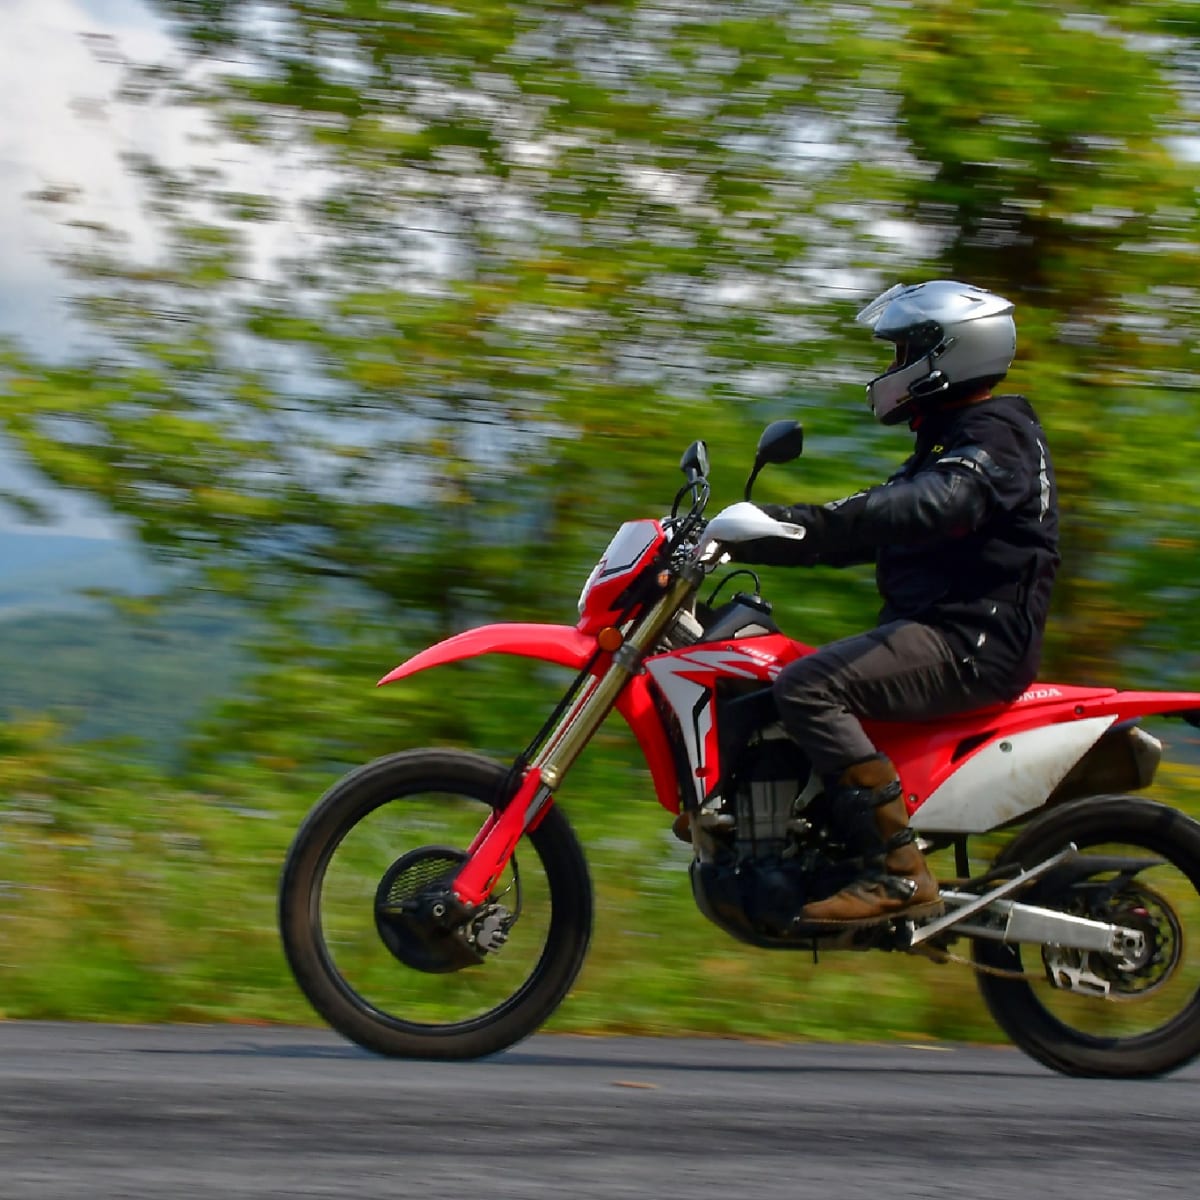 What Are Pit Bikes? Are They Street Legal? — Dirt Legal